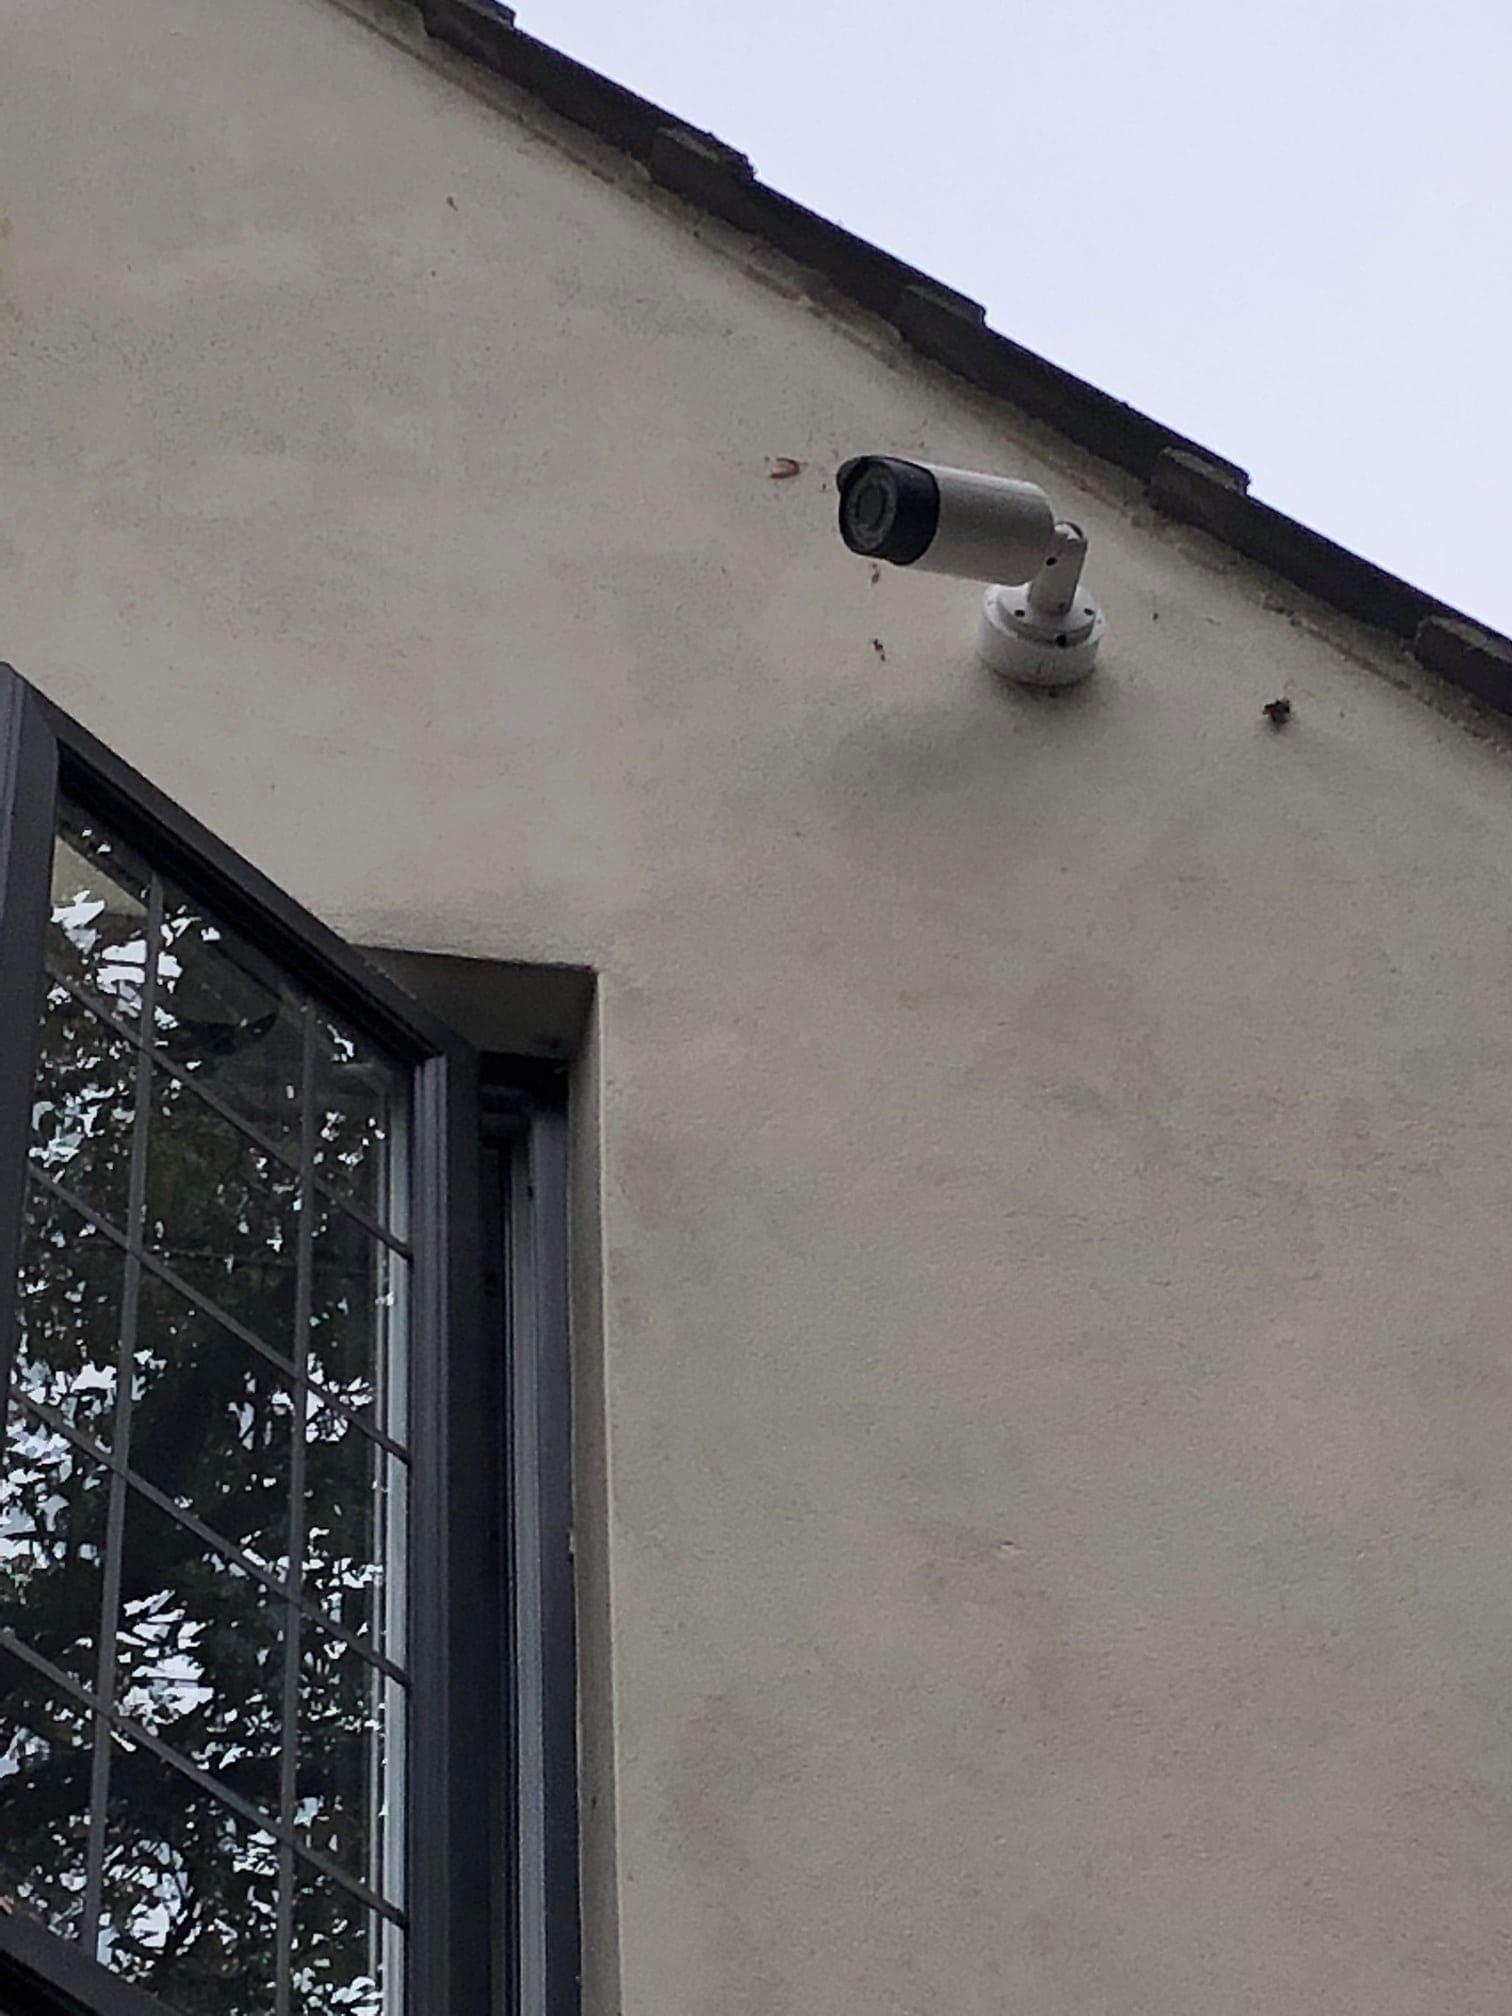 High Definition Security Systems Ltd Southminster 01245 426617